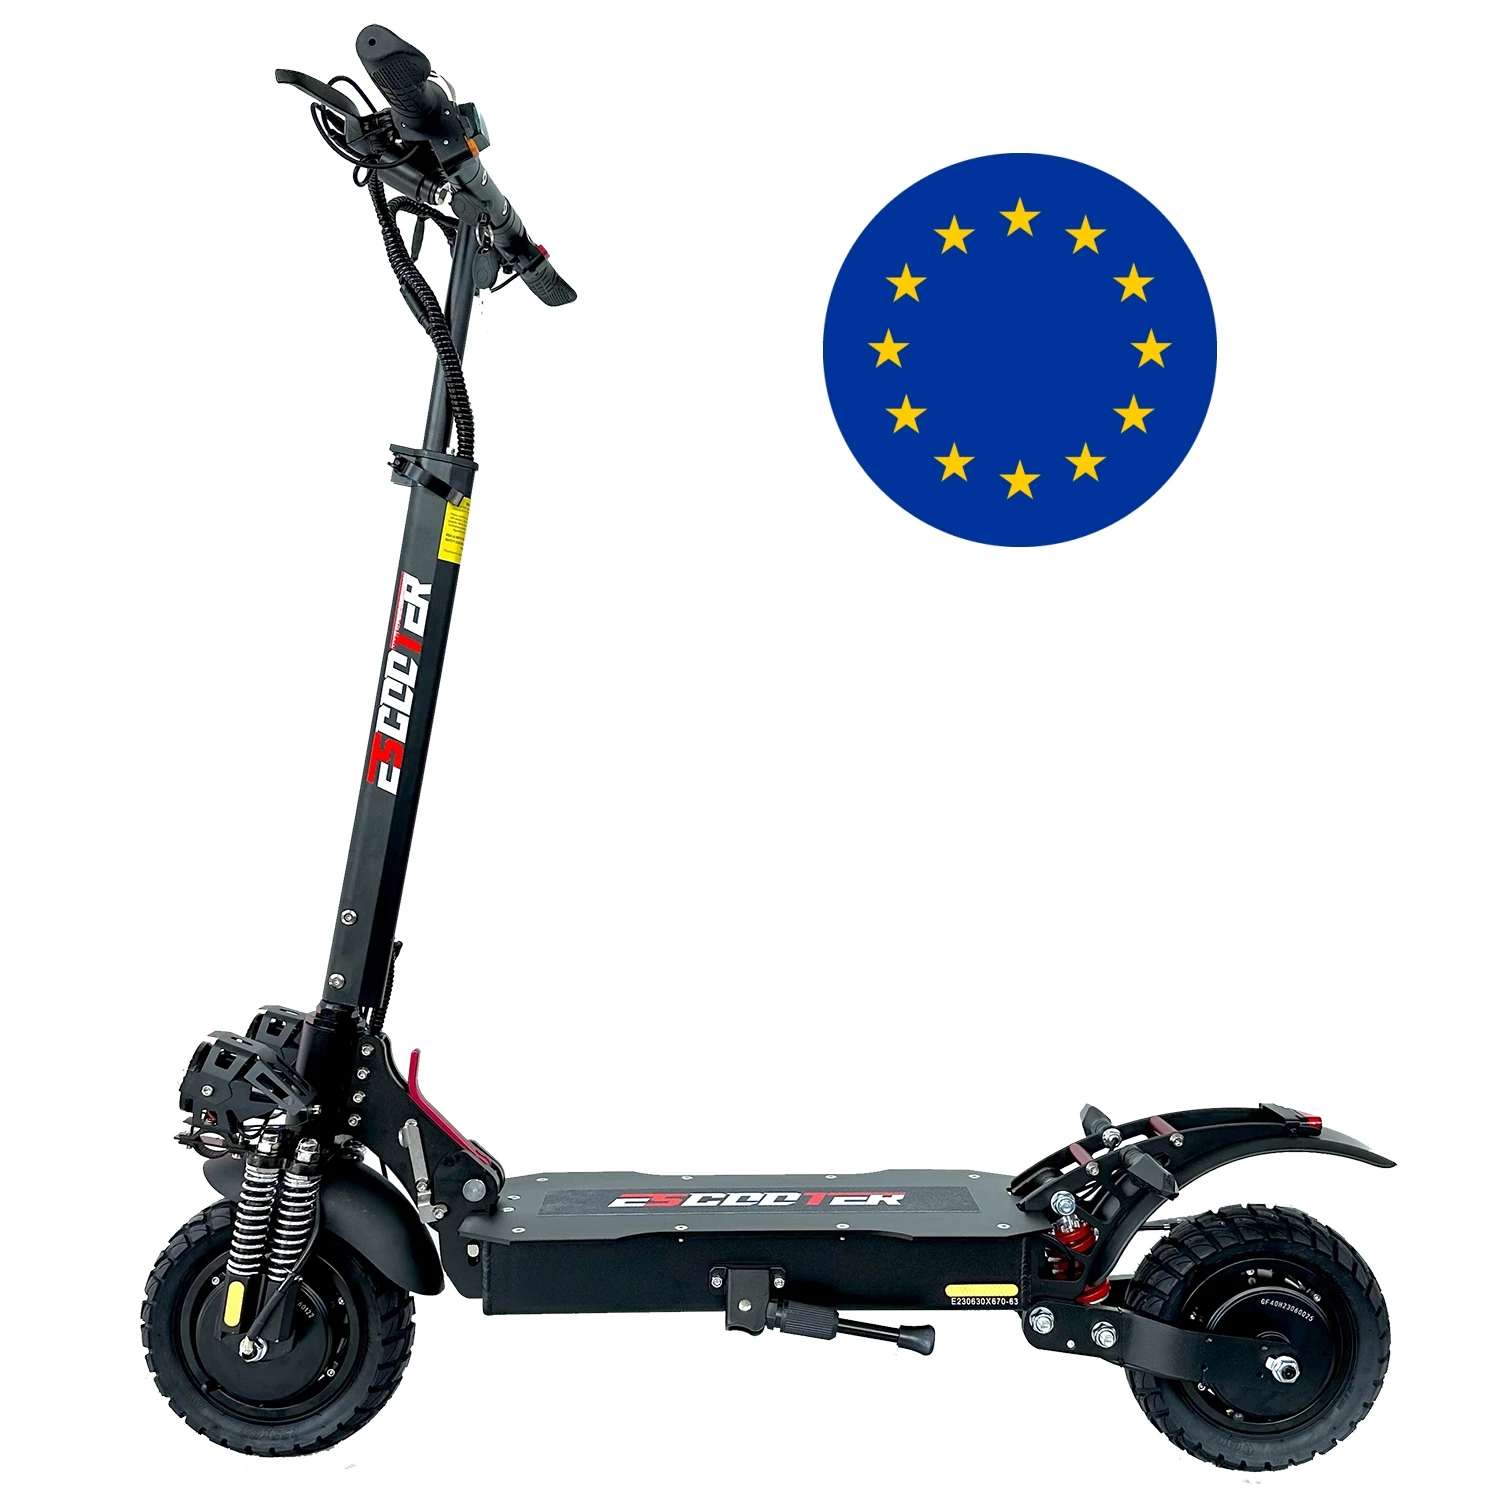 

new eu stock 150kg max load electric scooter X6 1200w*2 2400w 48v 60km range electric dual motor scooters